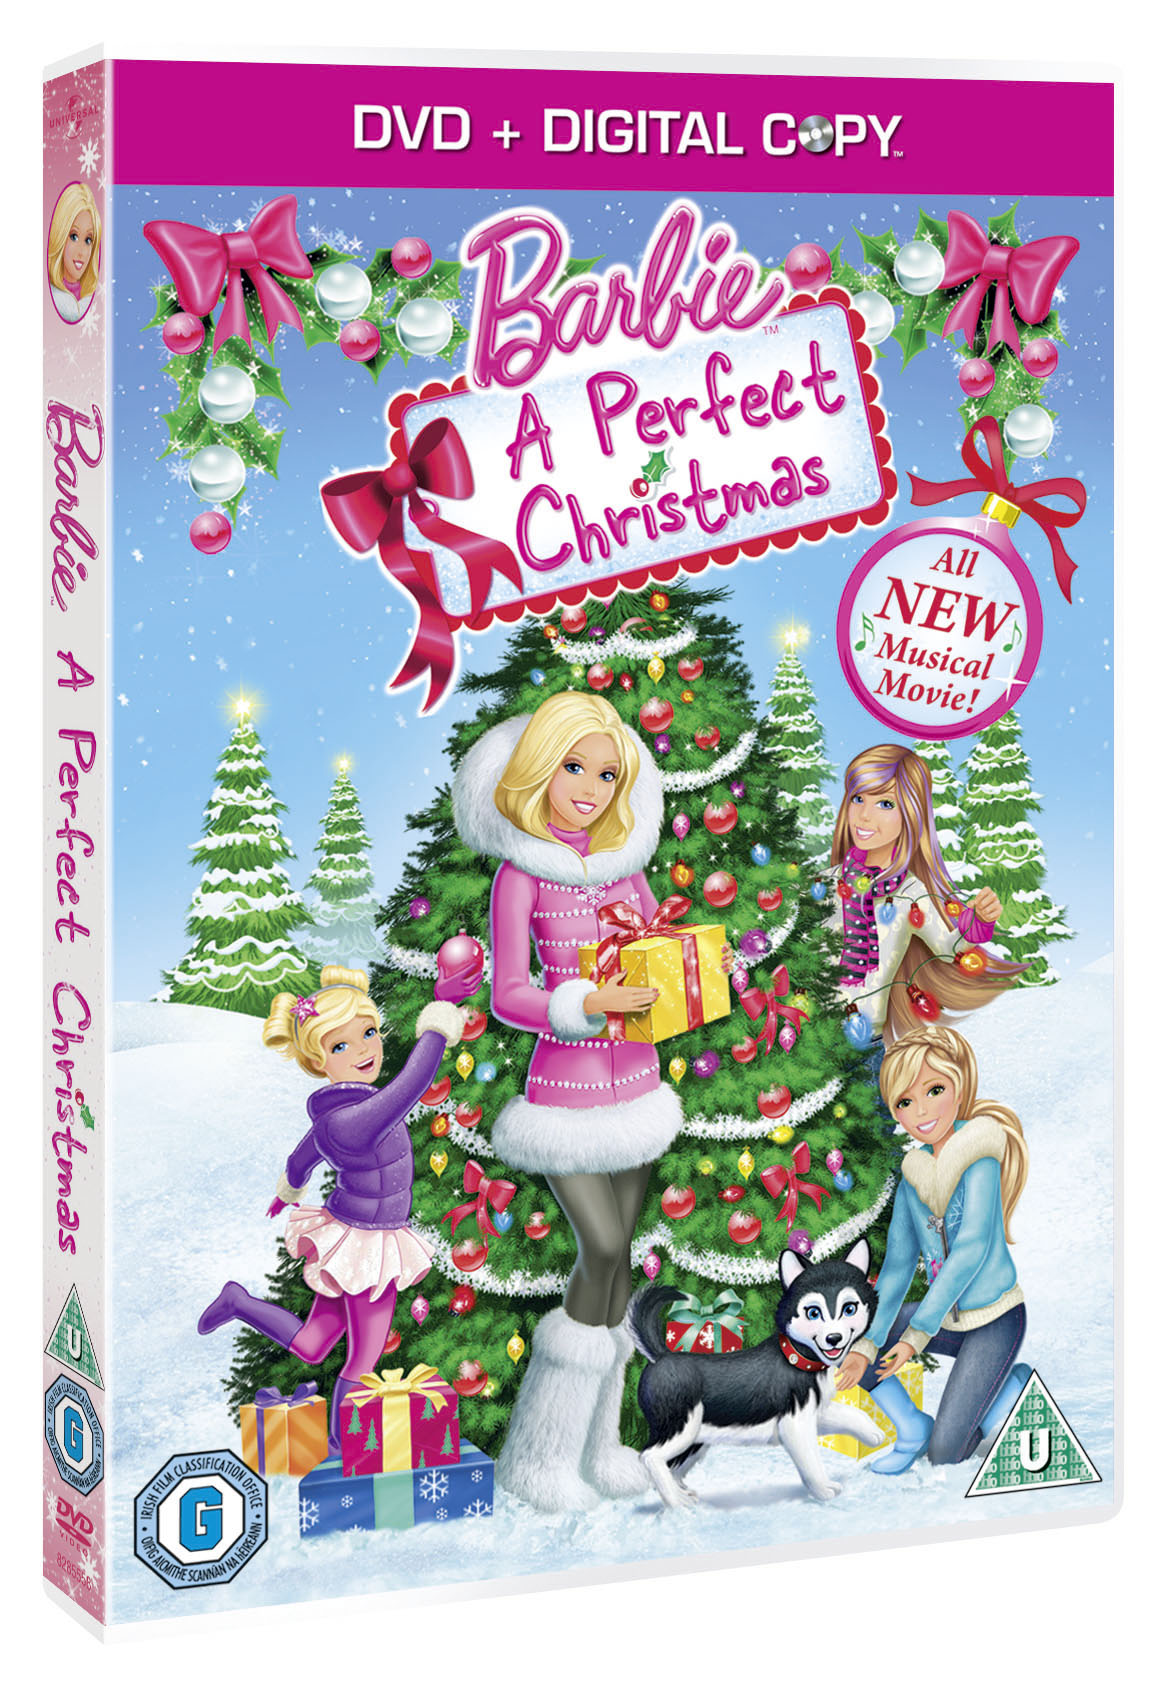 Barbie_Perfect-Christmas_DVD_DC_3D_Pack